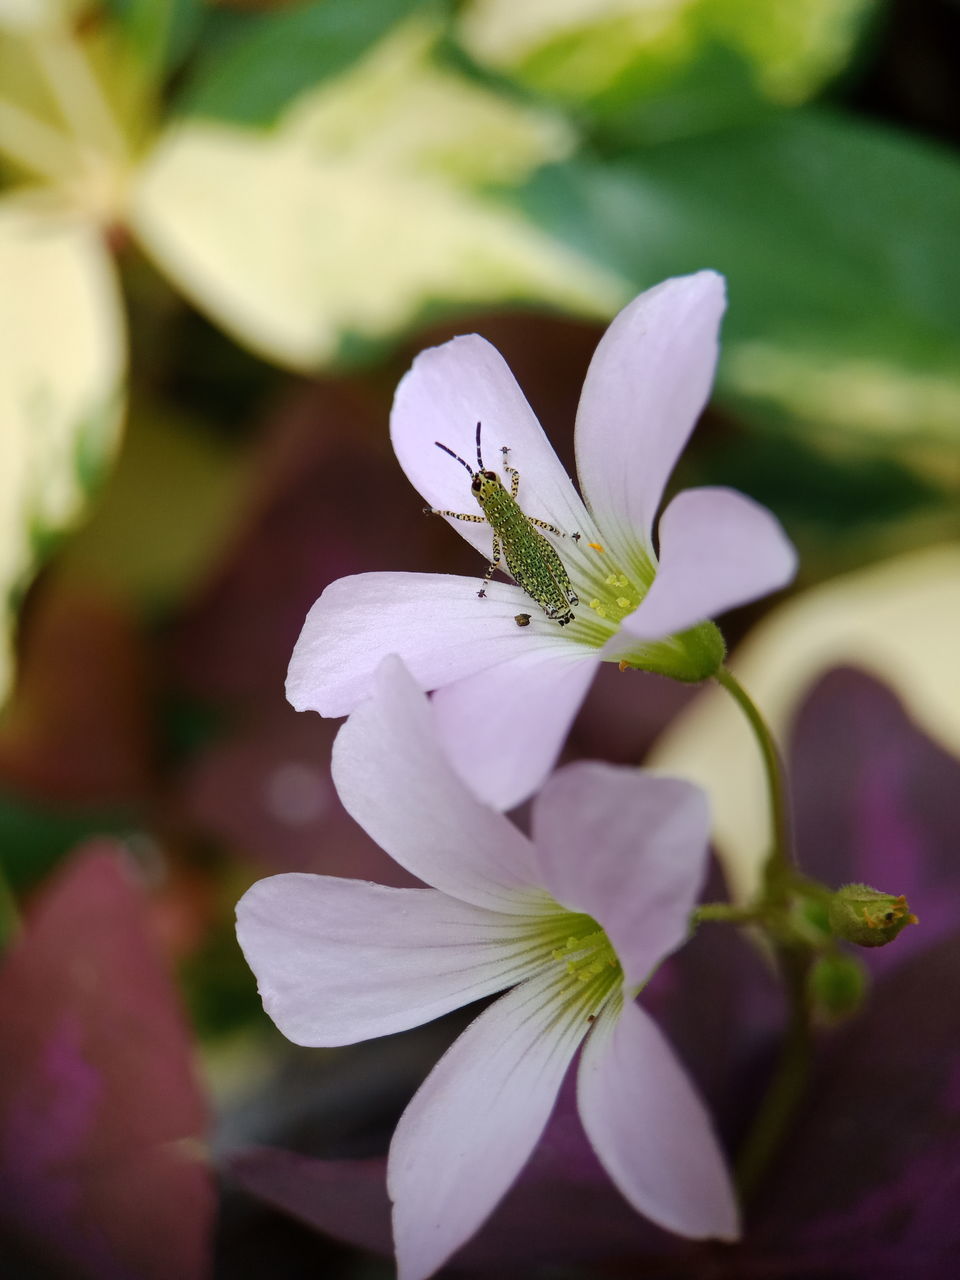 CLOSE-UP OF INSECT POLLINATING ON PURPLE FLOWER